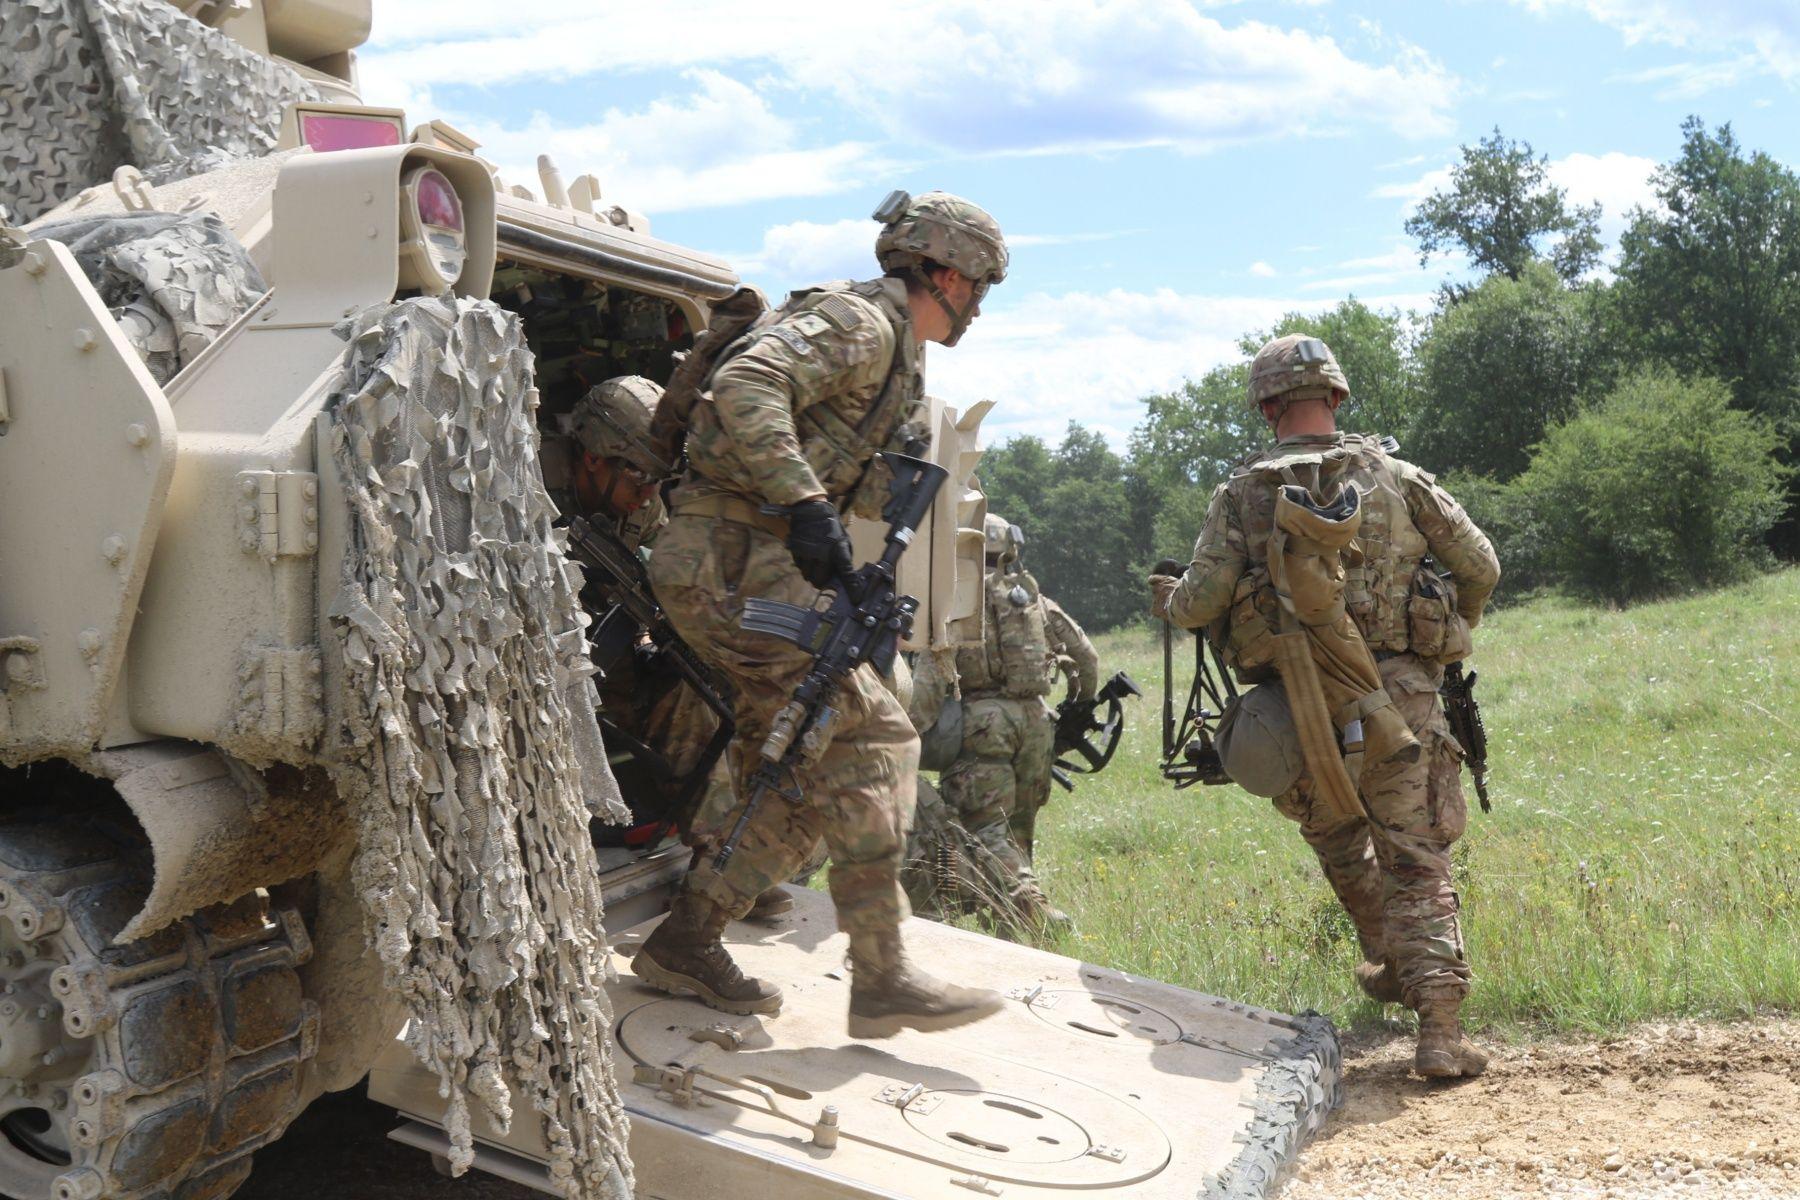 1-68 AR Silver Lion Logo - 1 68 AR Sharpens Readiness During Live Fire Exercise. Article